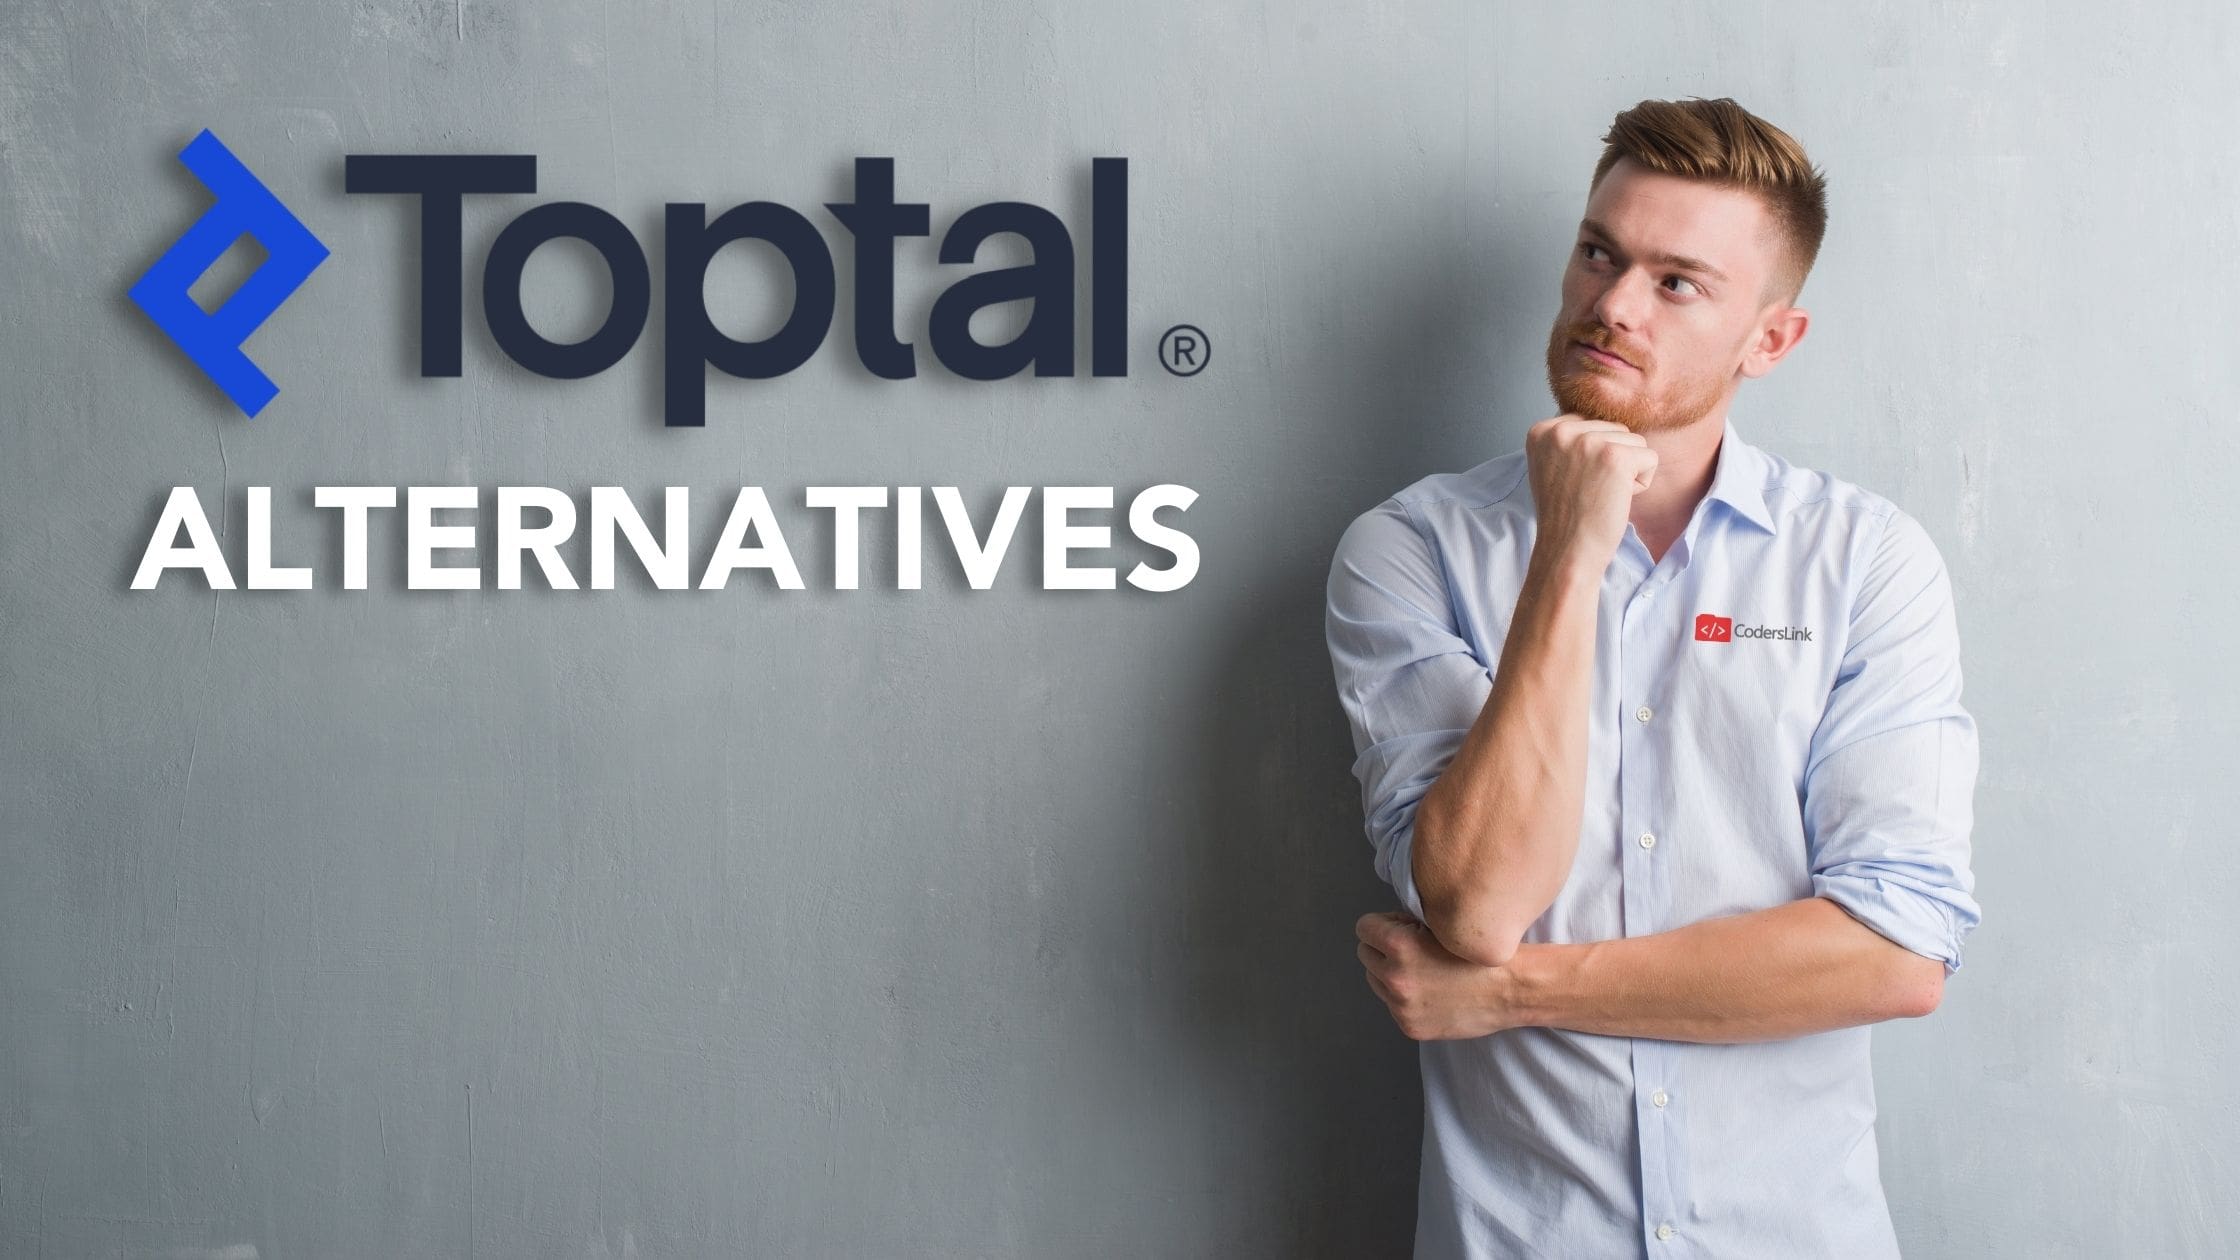 Toptal is a common solution for finding and hiring freelance software developers. Unfortunately, Toptal has many disadvantages that have led everyone to search for alternatives.